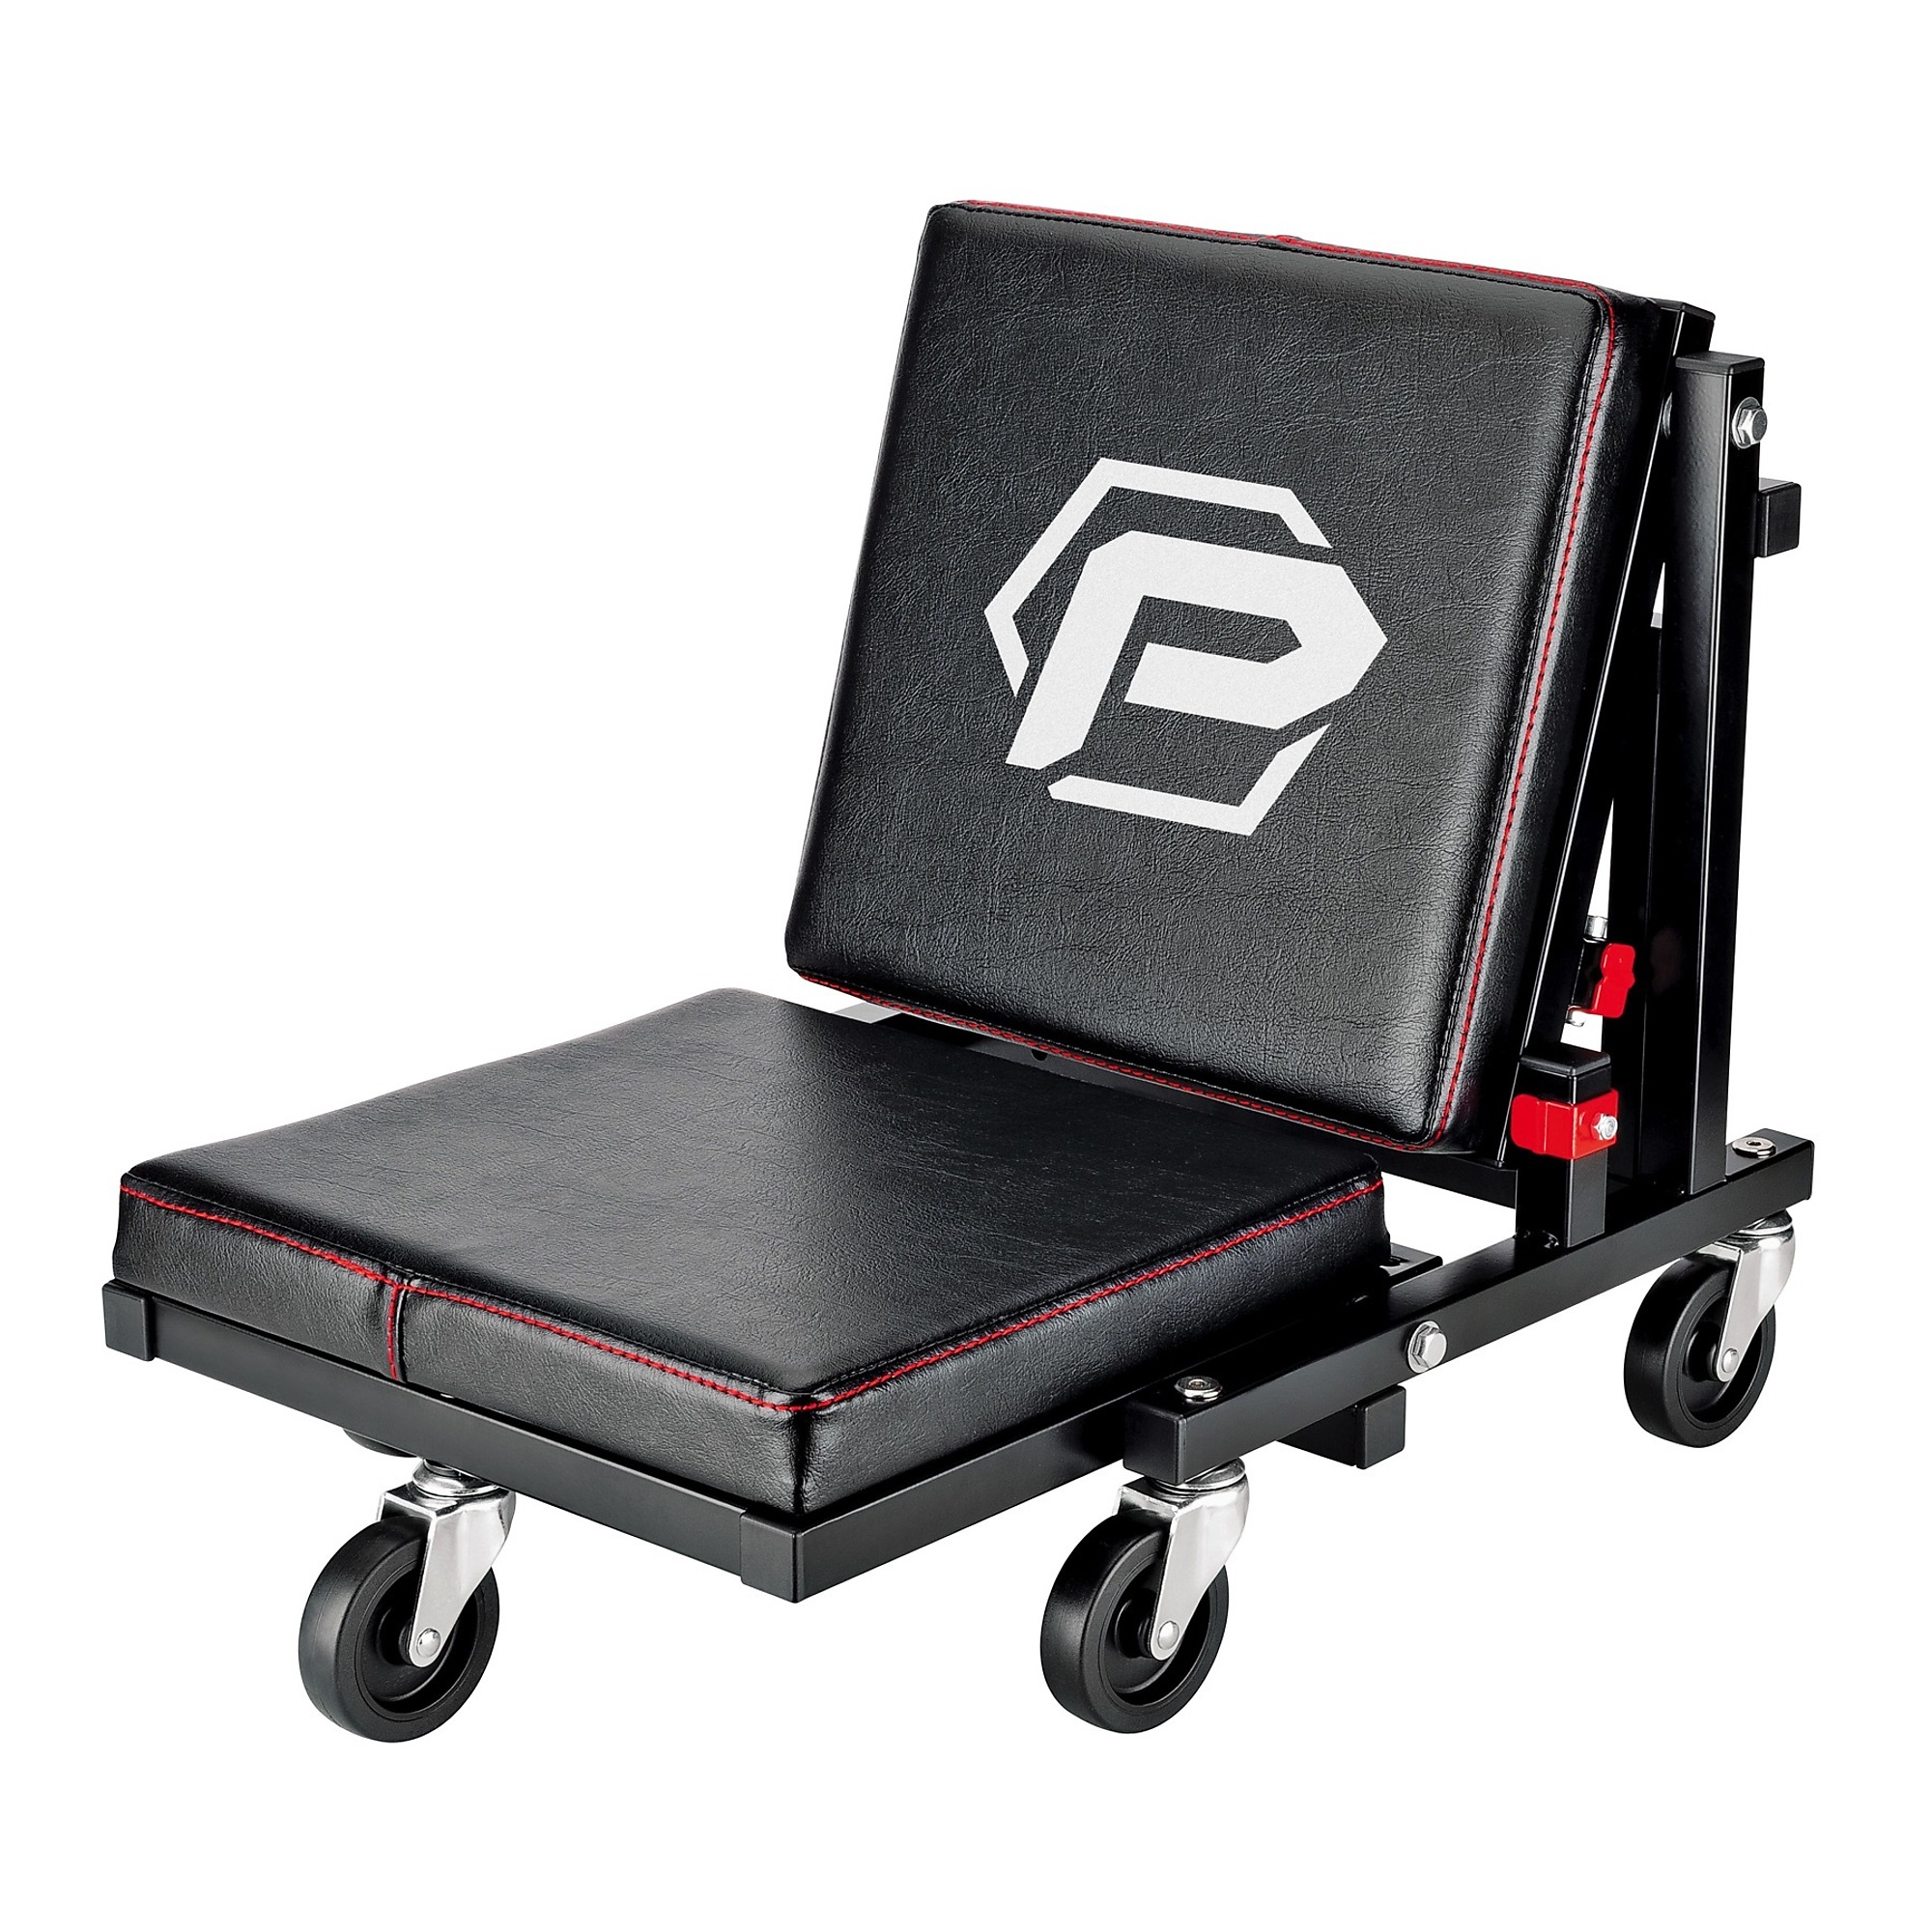 Powerbuilt, 2Inch-1 Low Creeper Seat Roller Stool, Capacity 330 lb, Max. Height 18 in, MInch Height 6 in, Model 240298